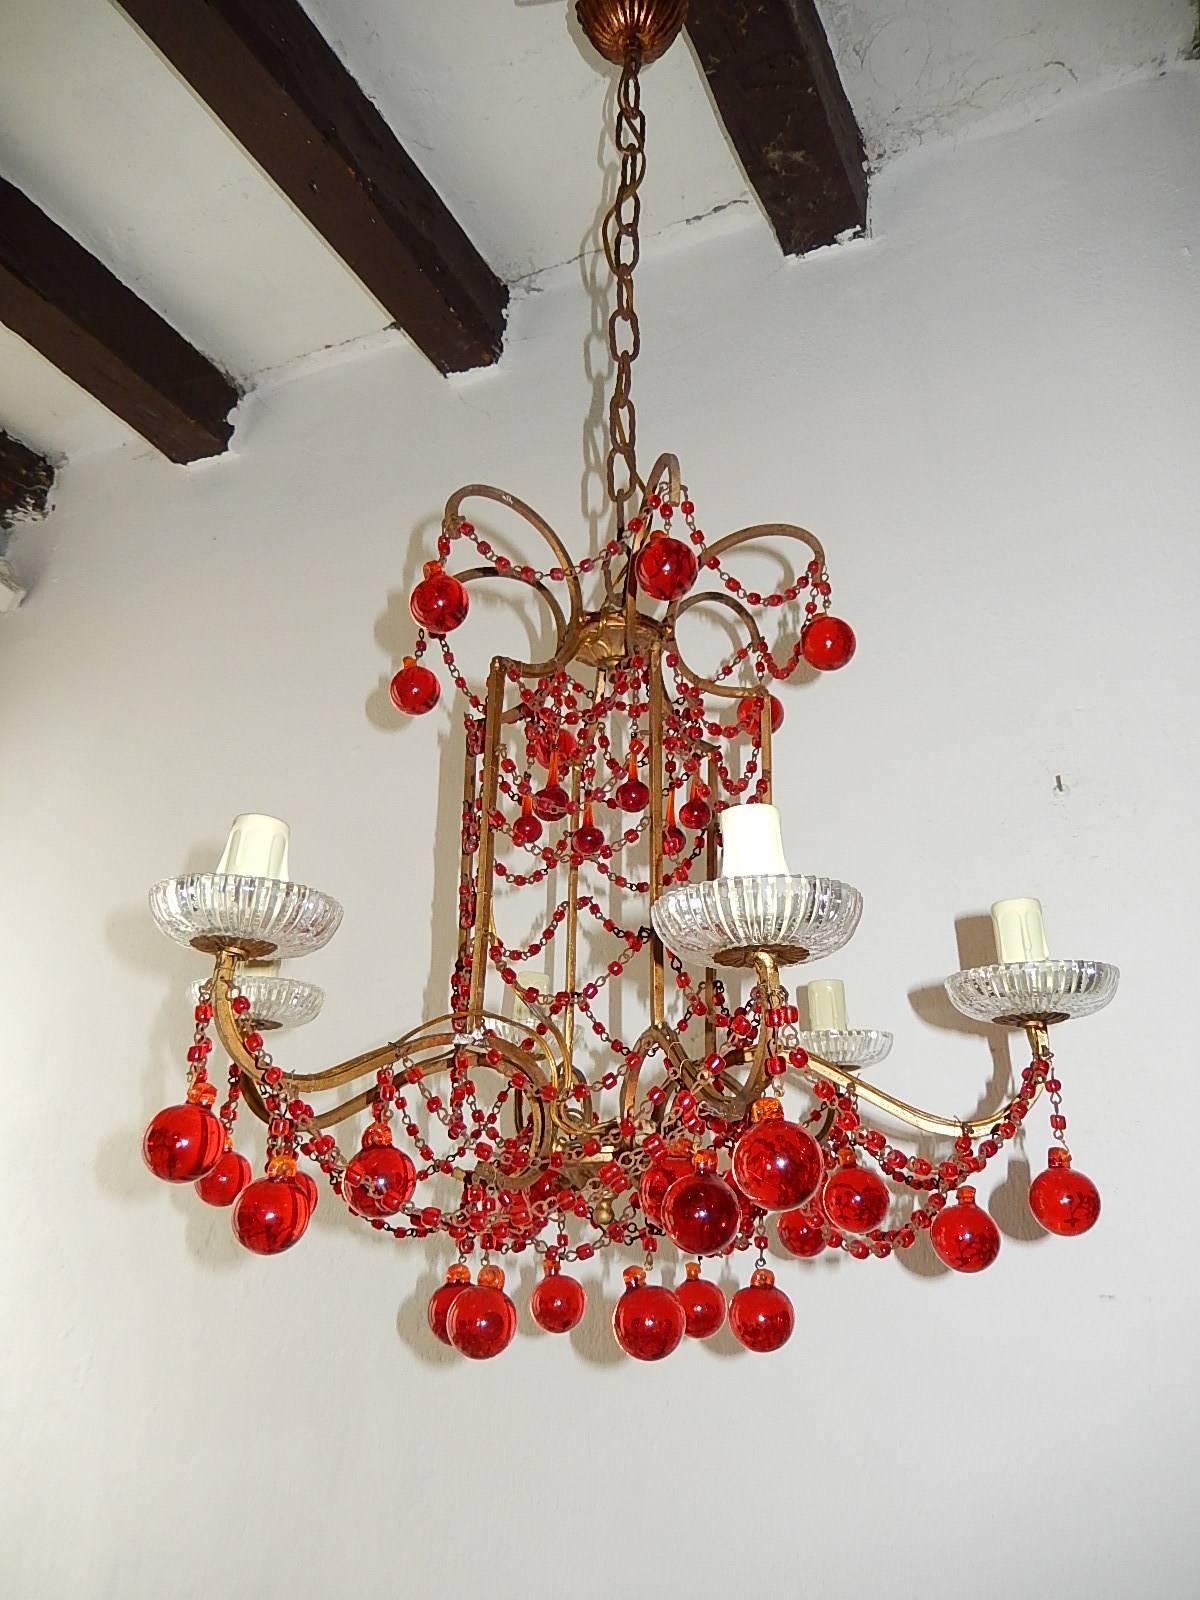 Housing six lights, rewired and ready to hang. Crystal bobeches. Swags of macaroni beads in red with matching red Murano balls. Adding 18 inches of original chain and canopy still intact. Free priority shipping from Italy.